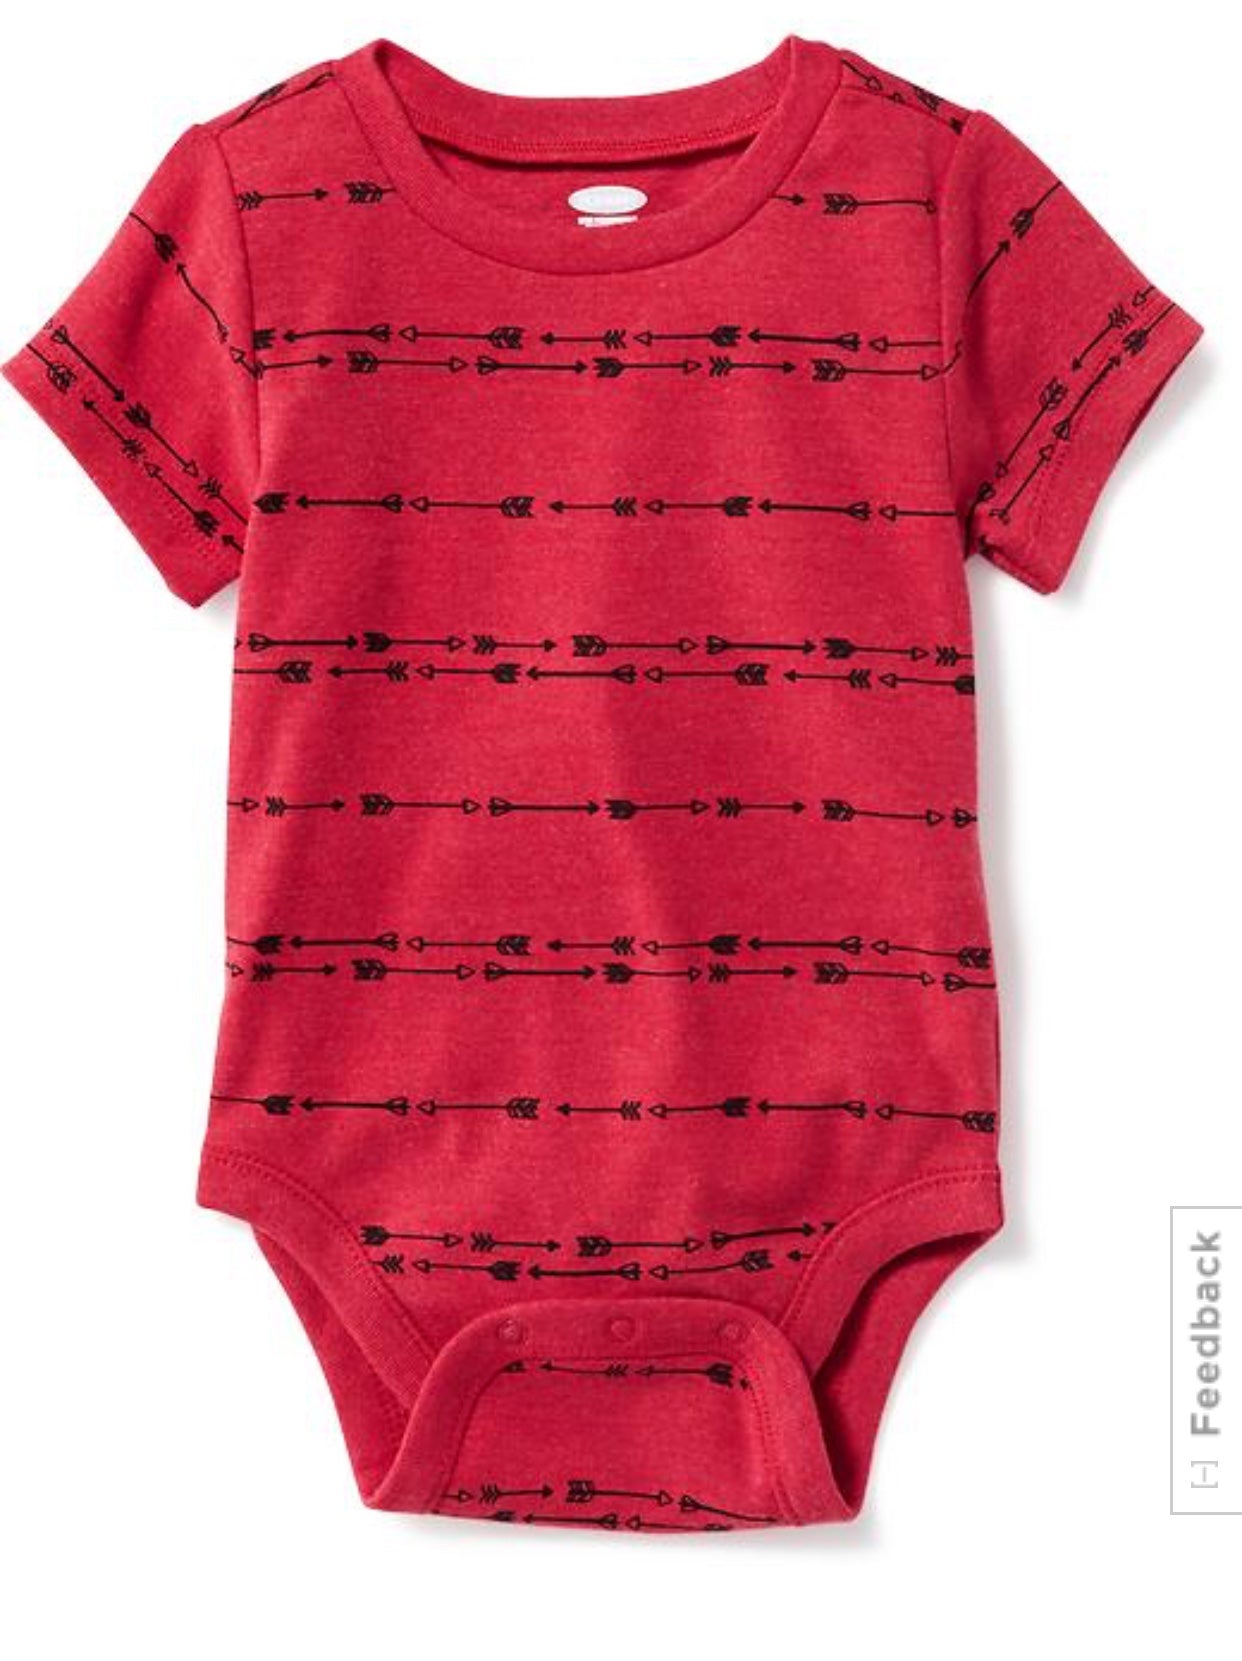 old navy baby girl holiday dresses